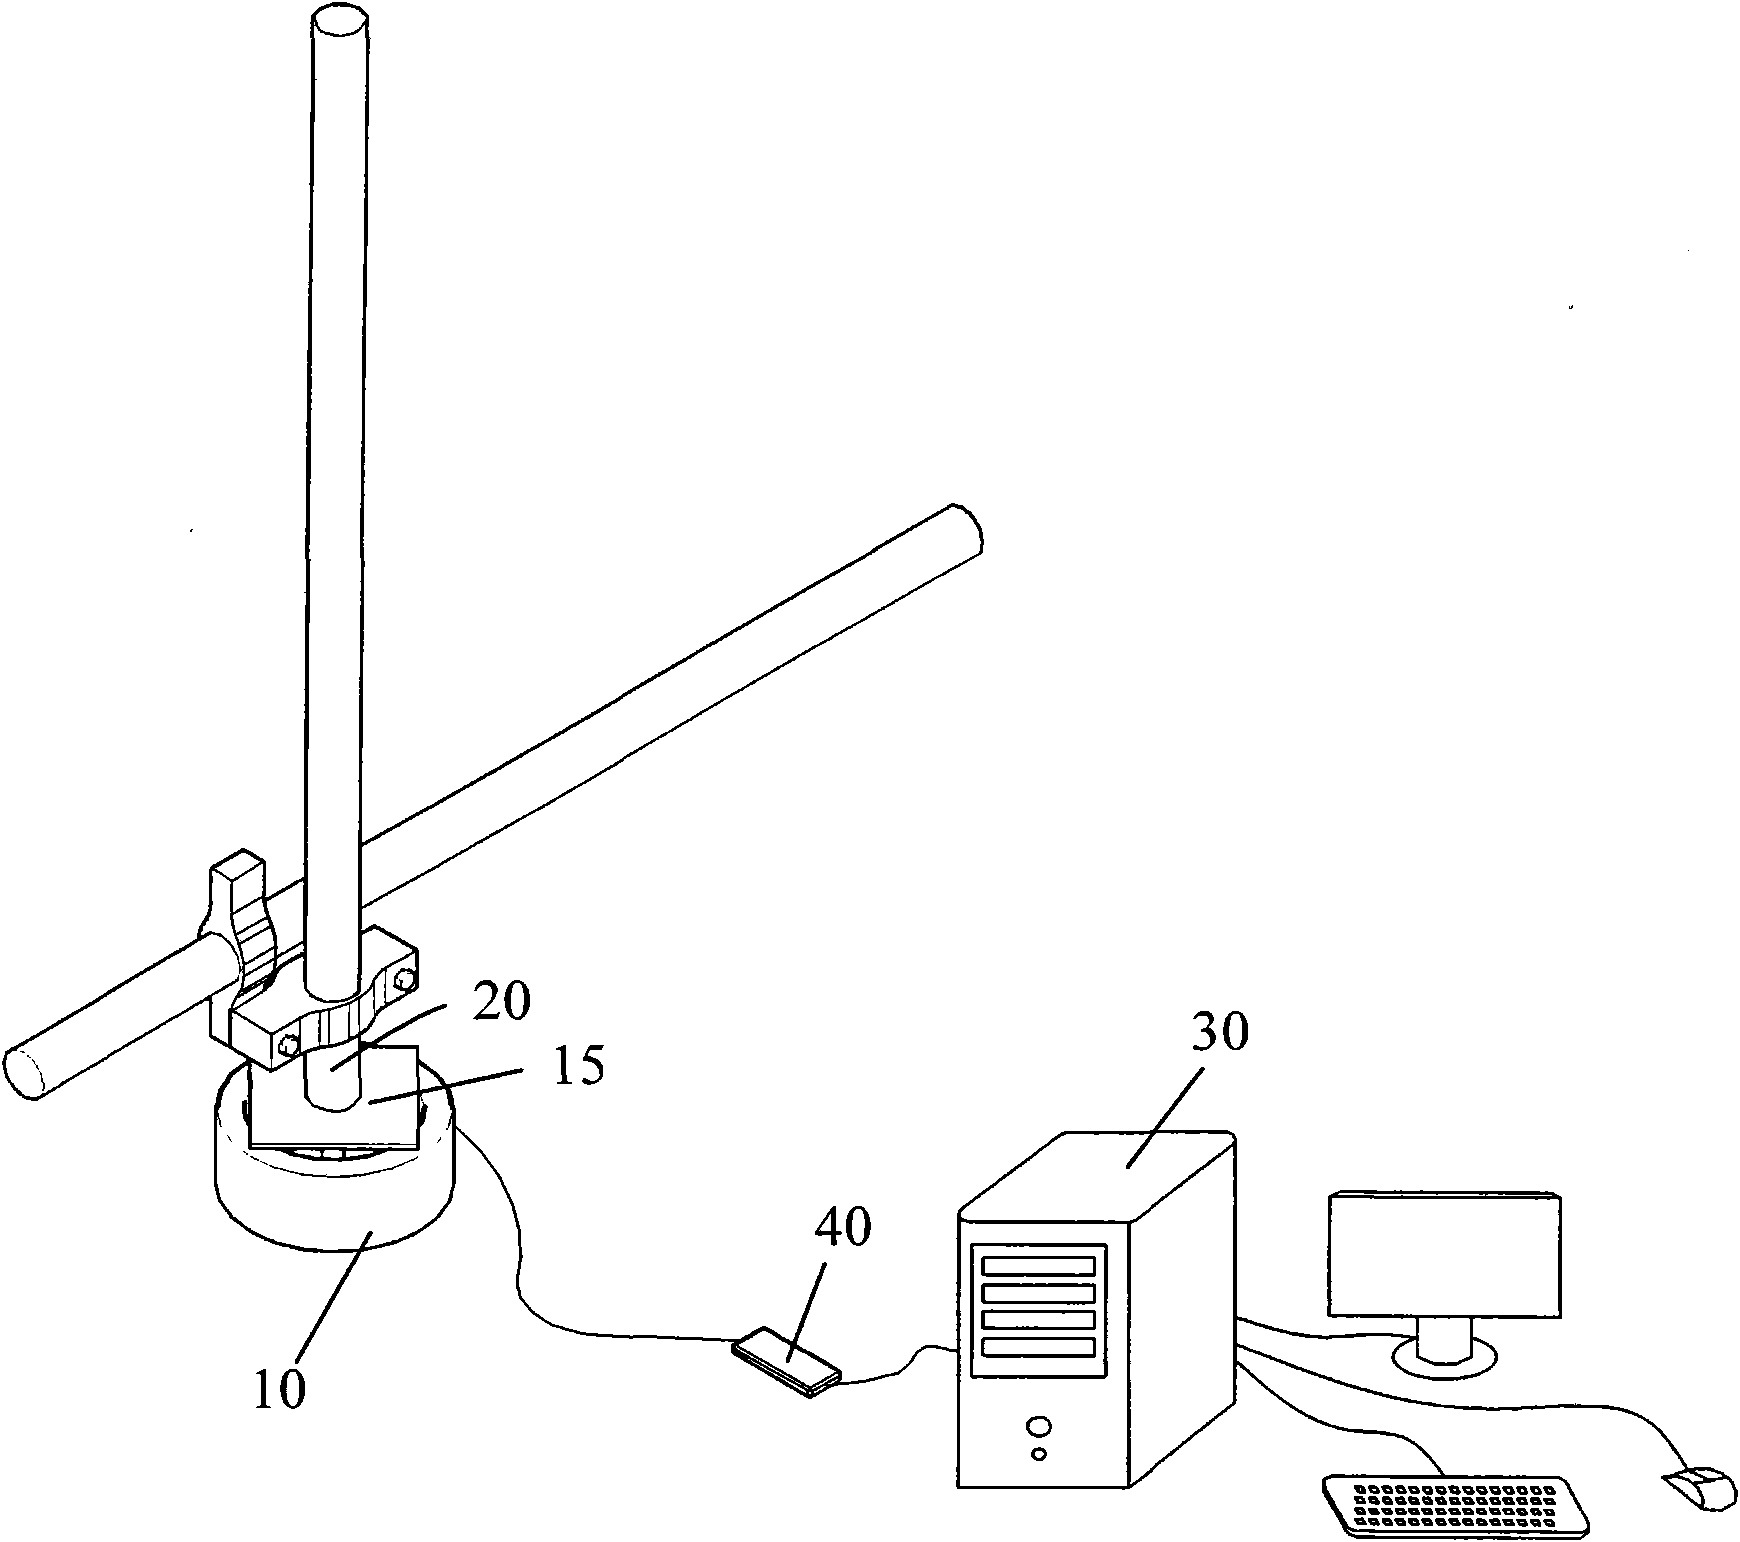 Method for monitoring axial force of scaffold upright rod